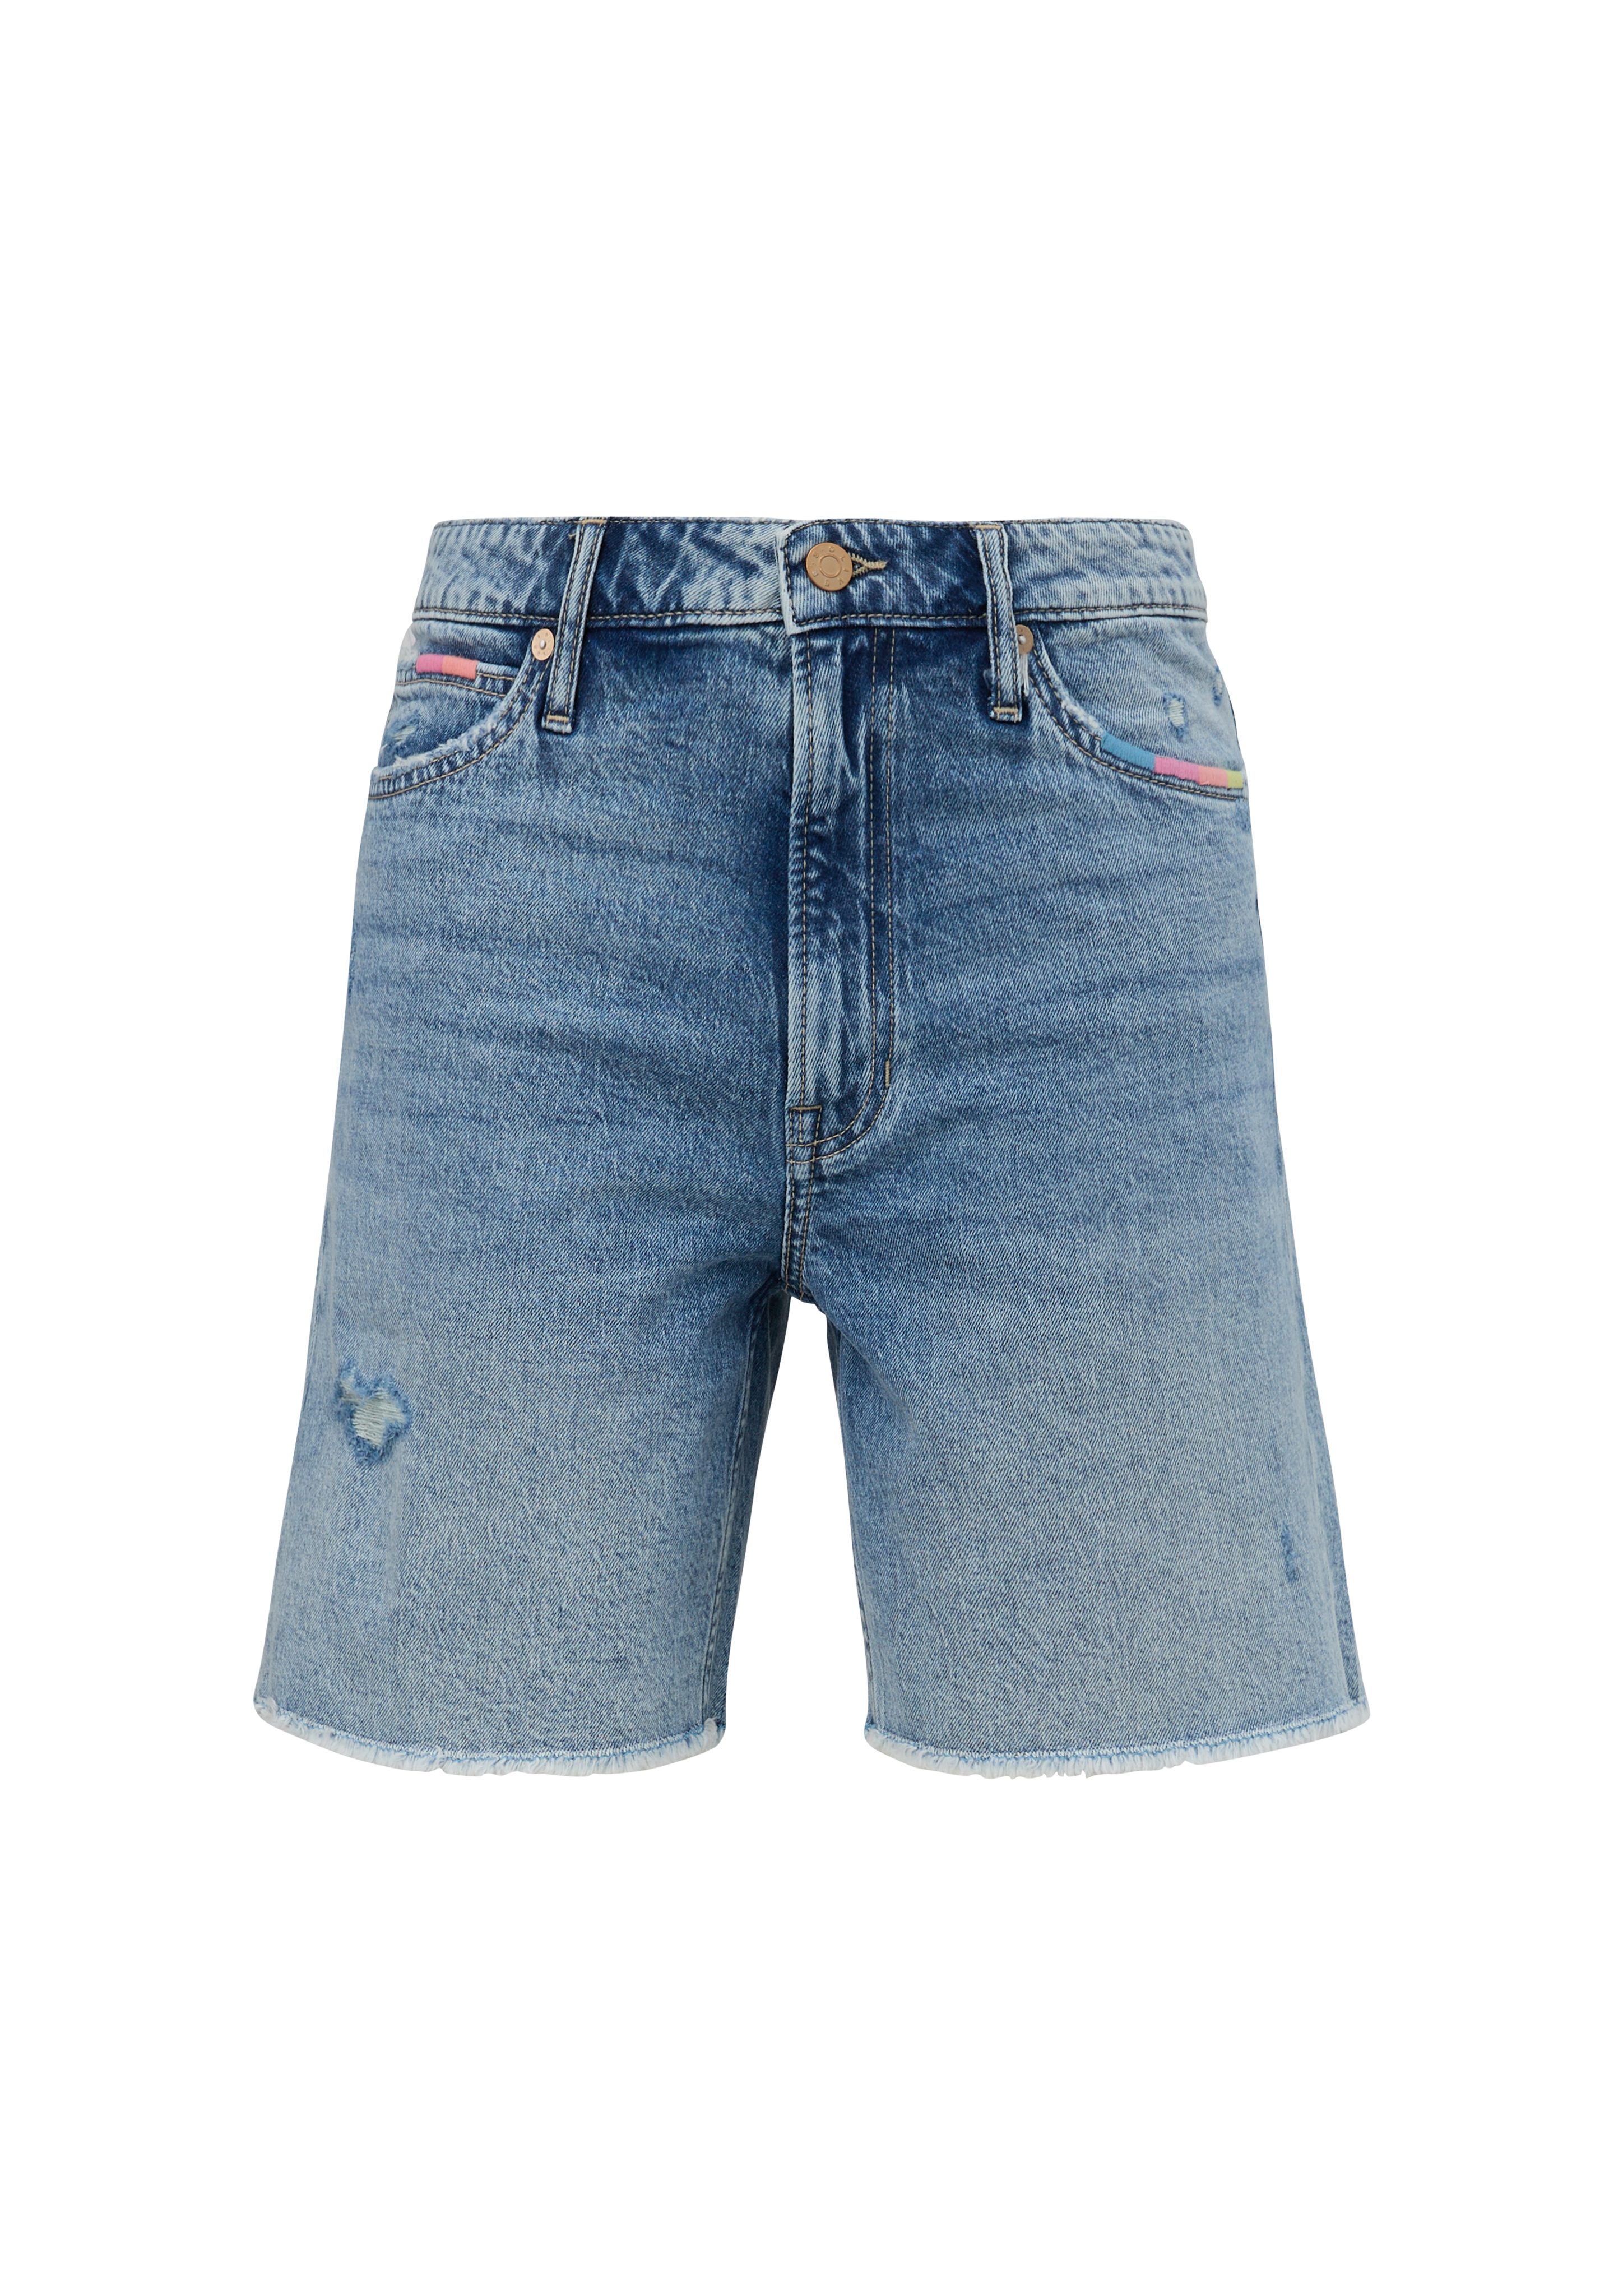 s.Oliver Jeansshorts Jeans-Shorts / Relaxed Destroyes, Waschung, Leg / Fit Mid Straight Rise Kontrast-Details 